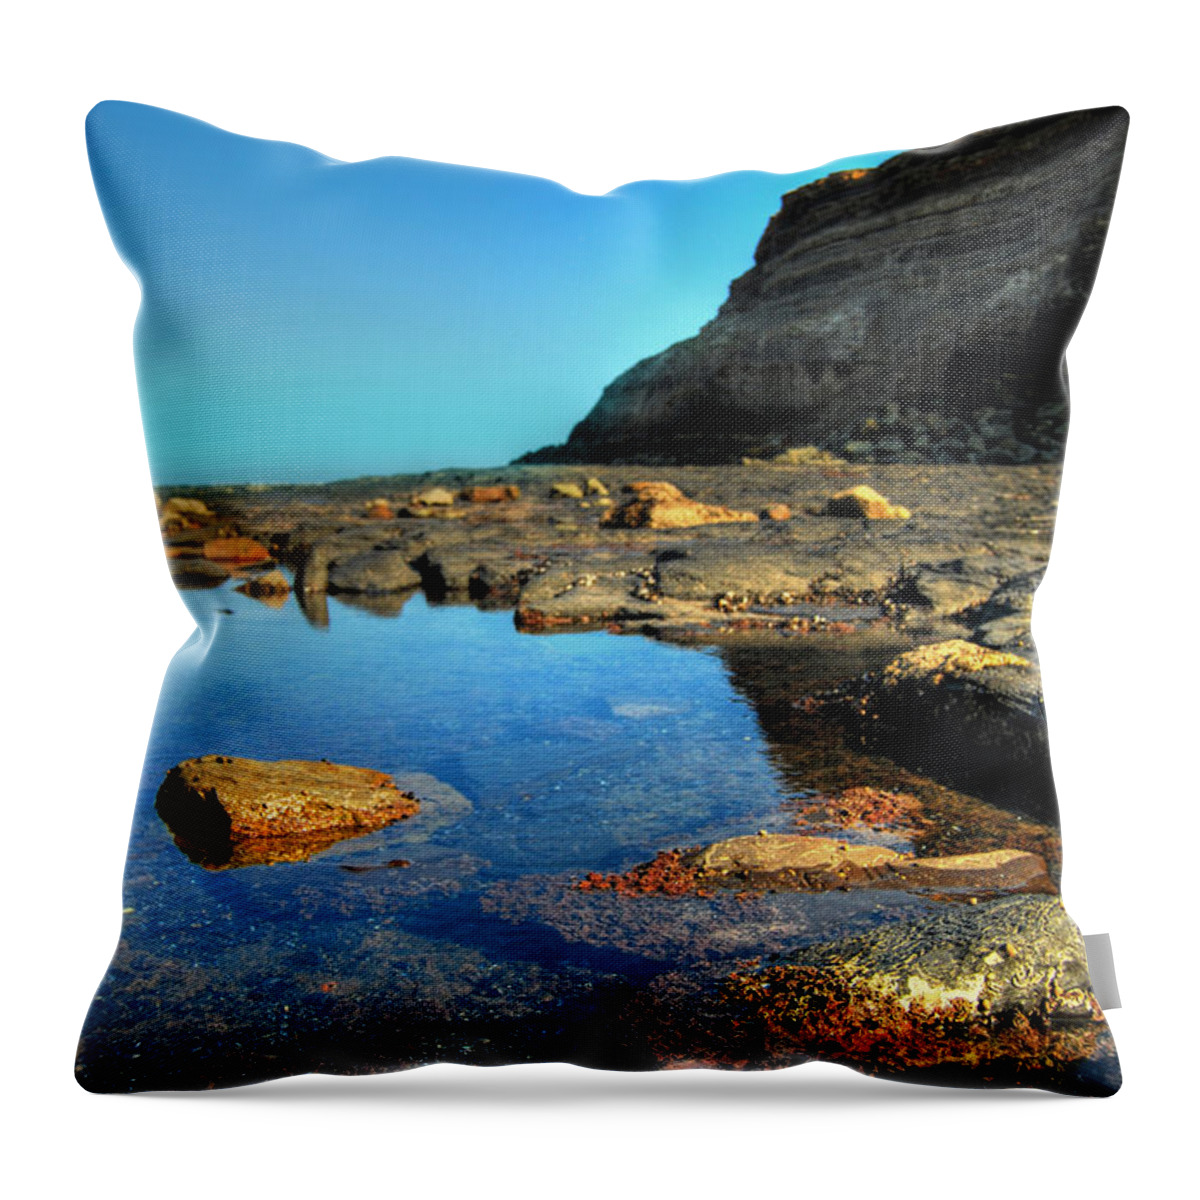  Throw Pillow featuring the photograph Lwv20057 by Lee Winter